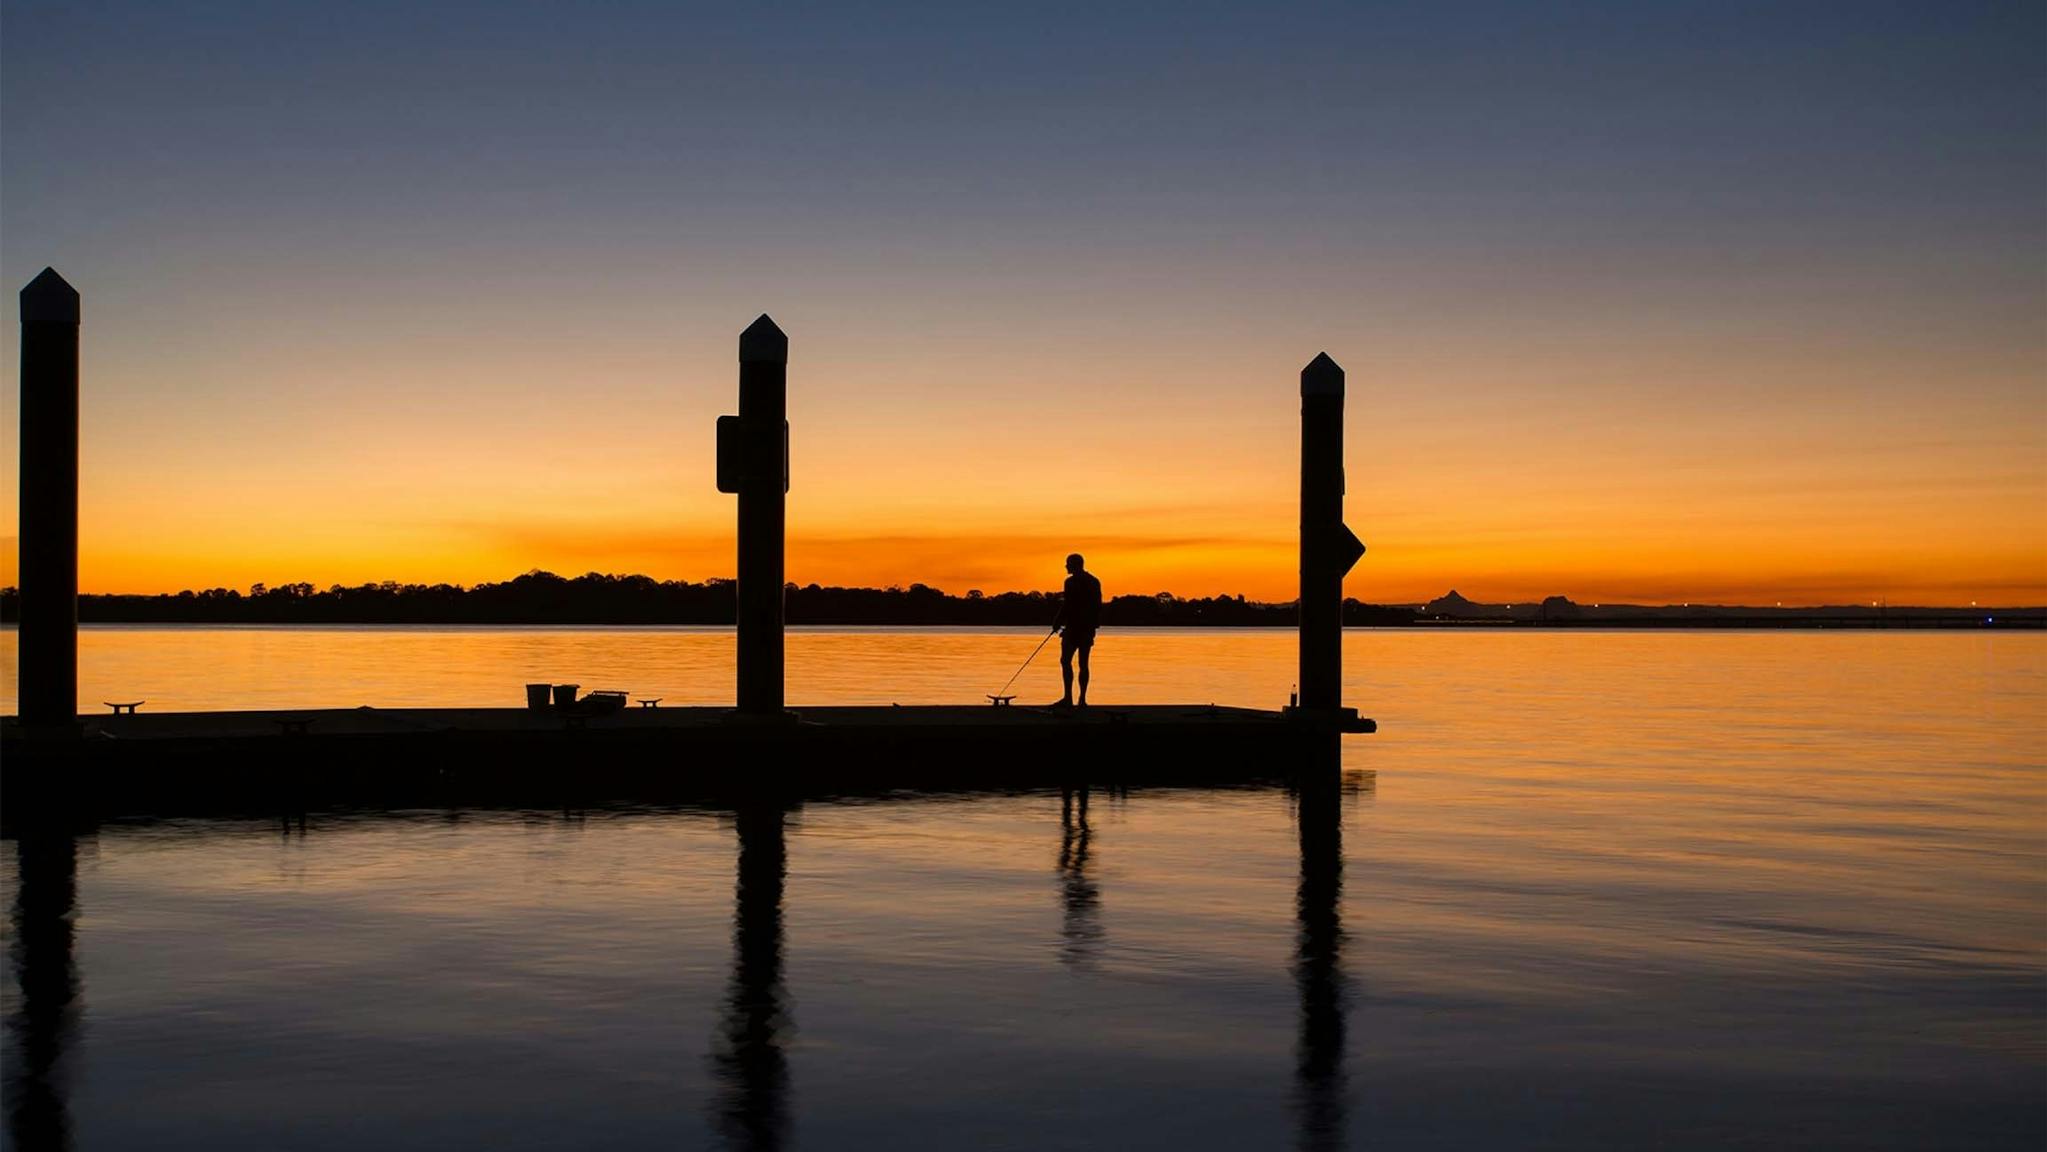 The silhouette of a man fishing off a pier at Sunset, from Bongaree Beach Bribie Island